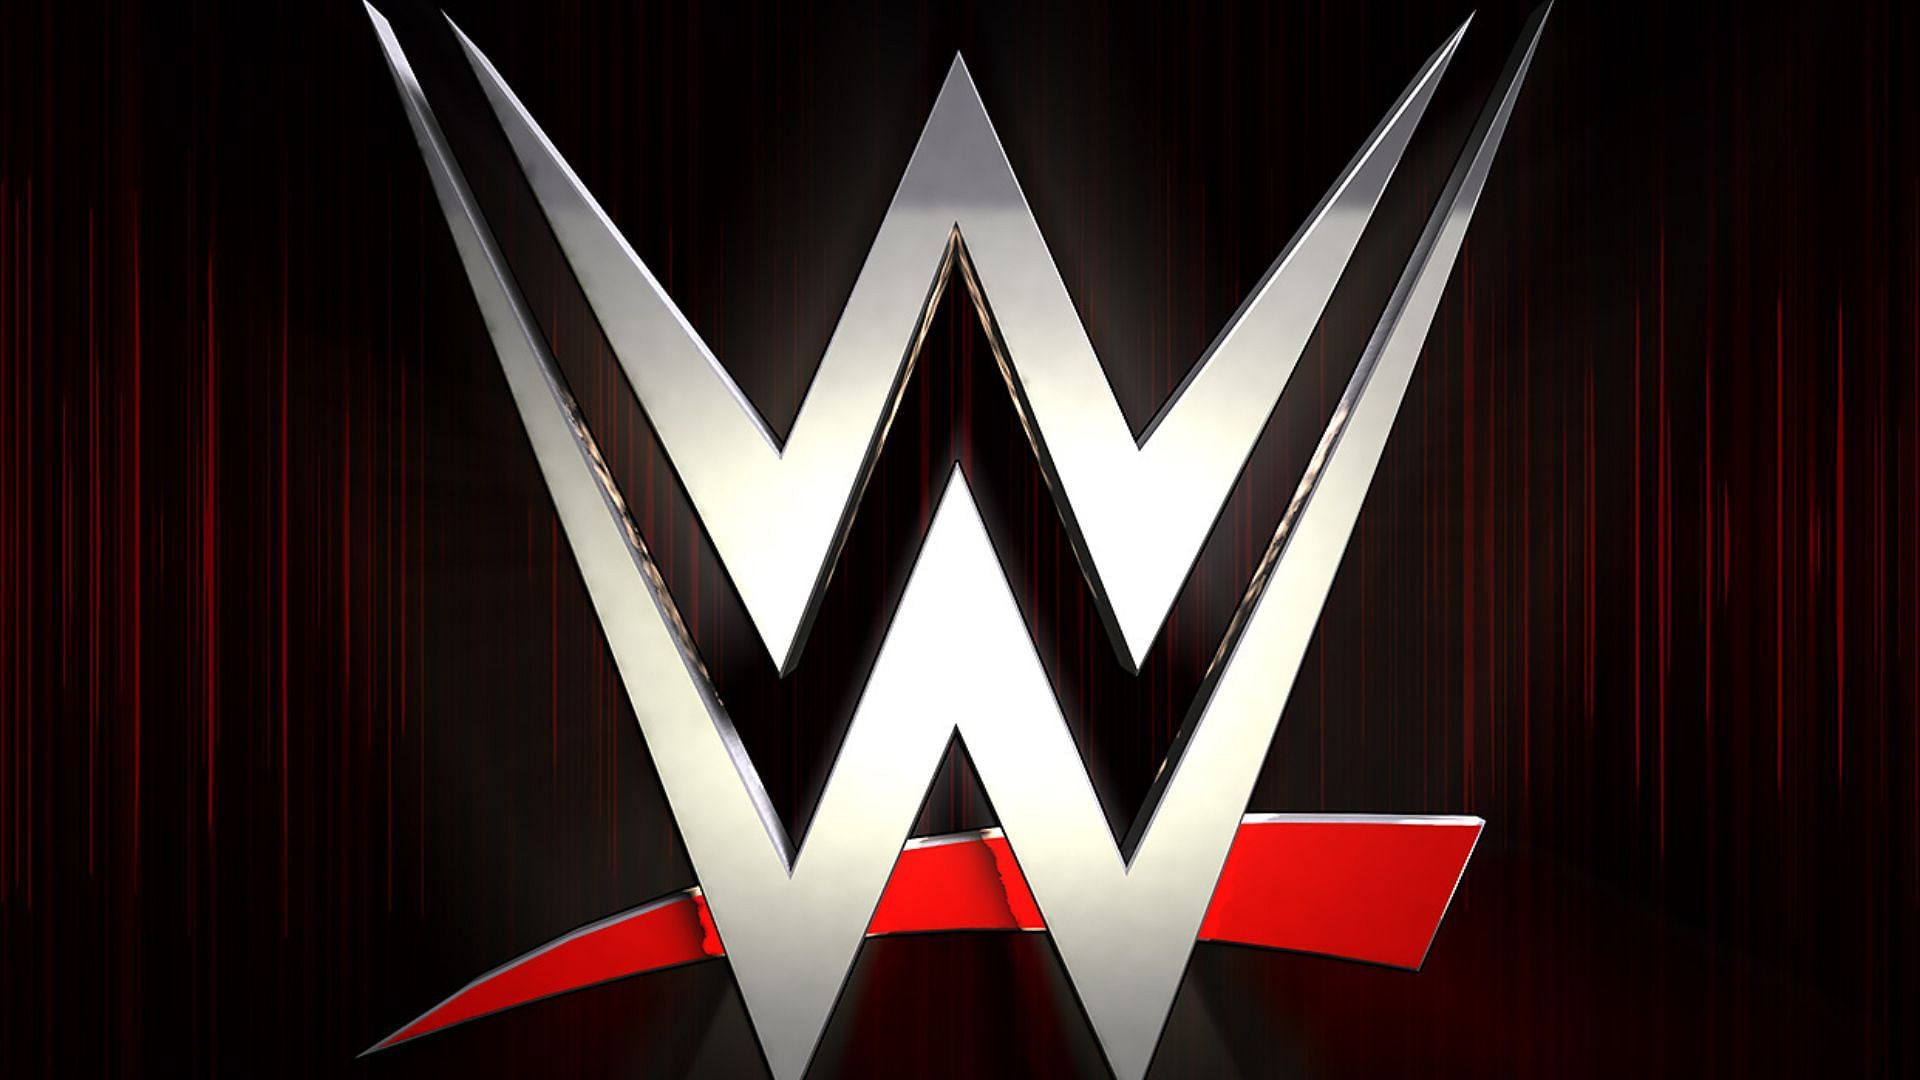 WWE was founded 70 years ago in 1953 